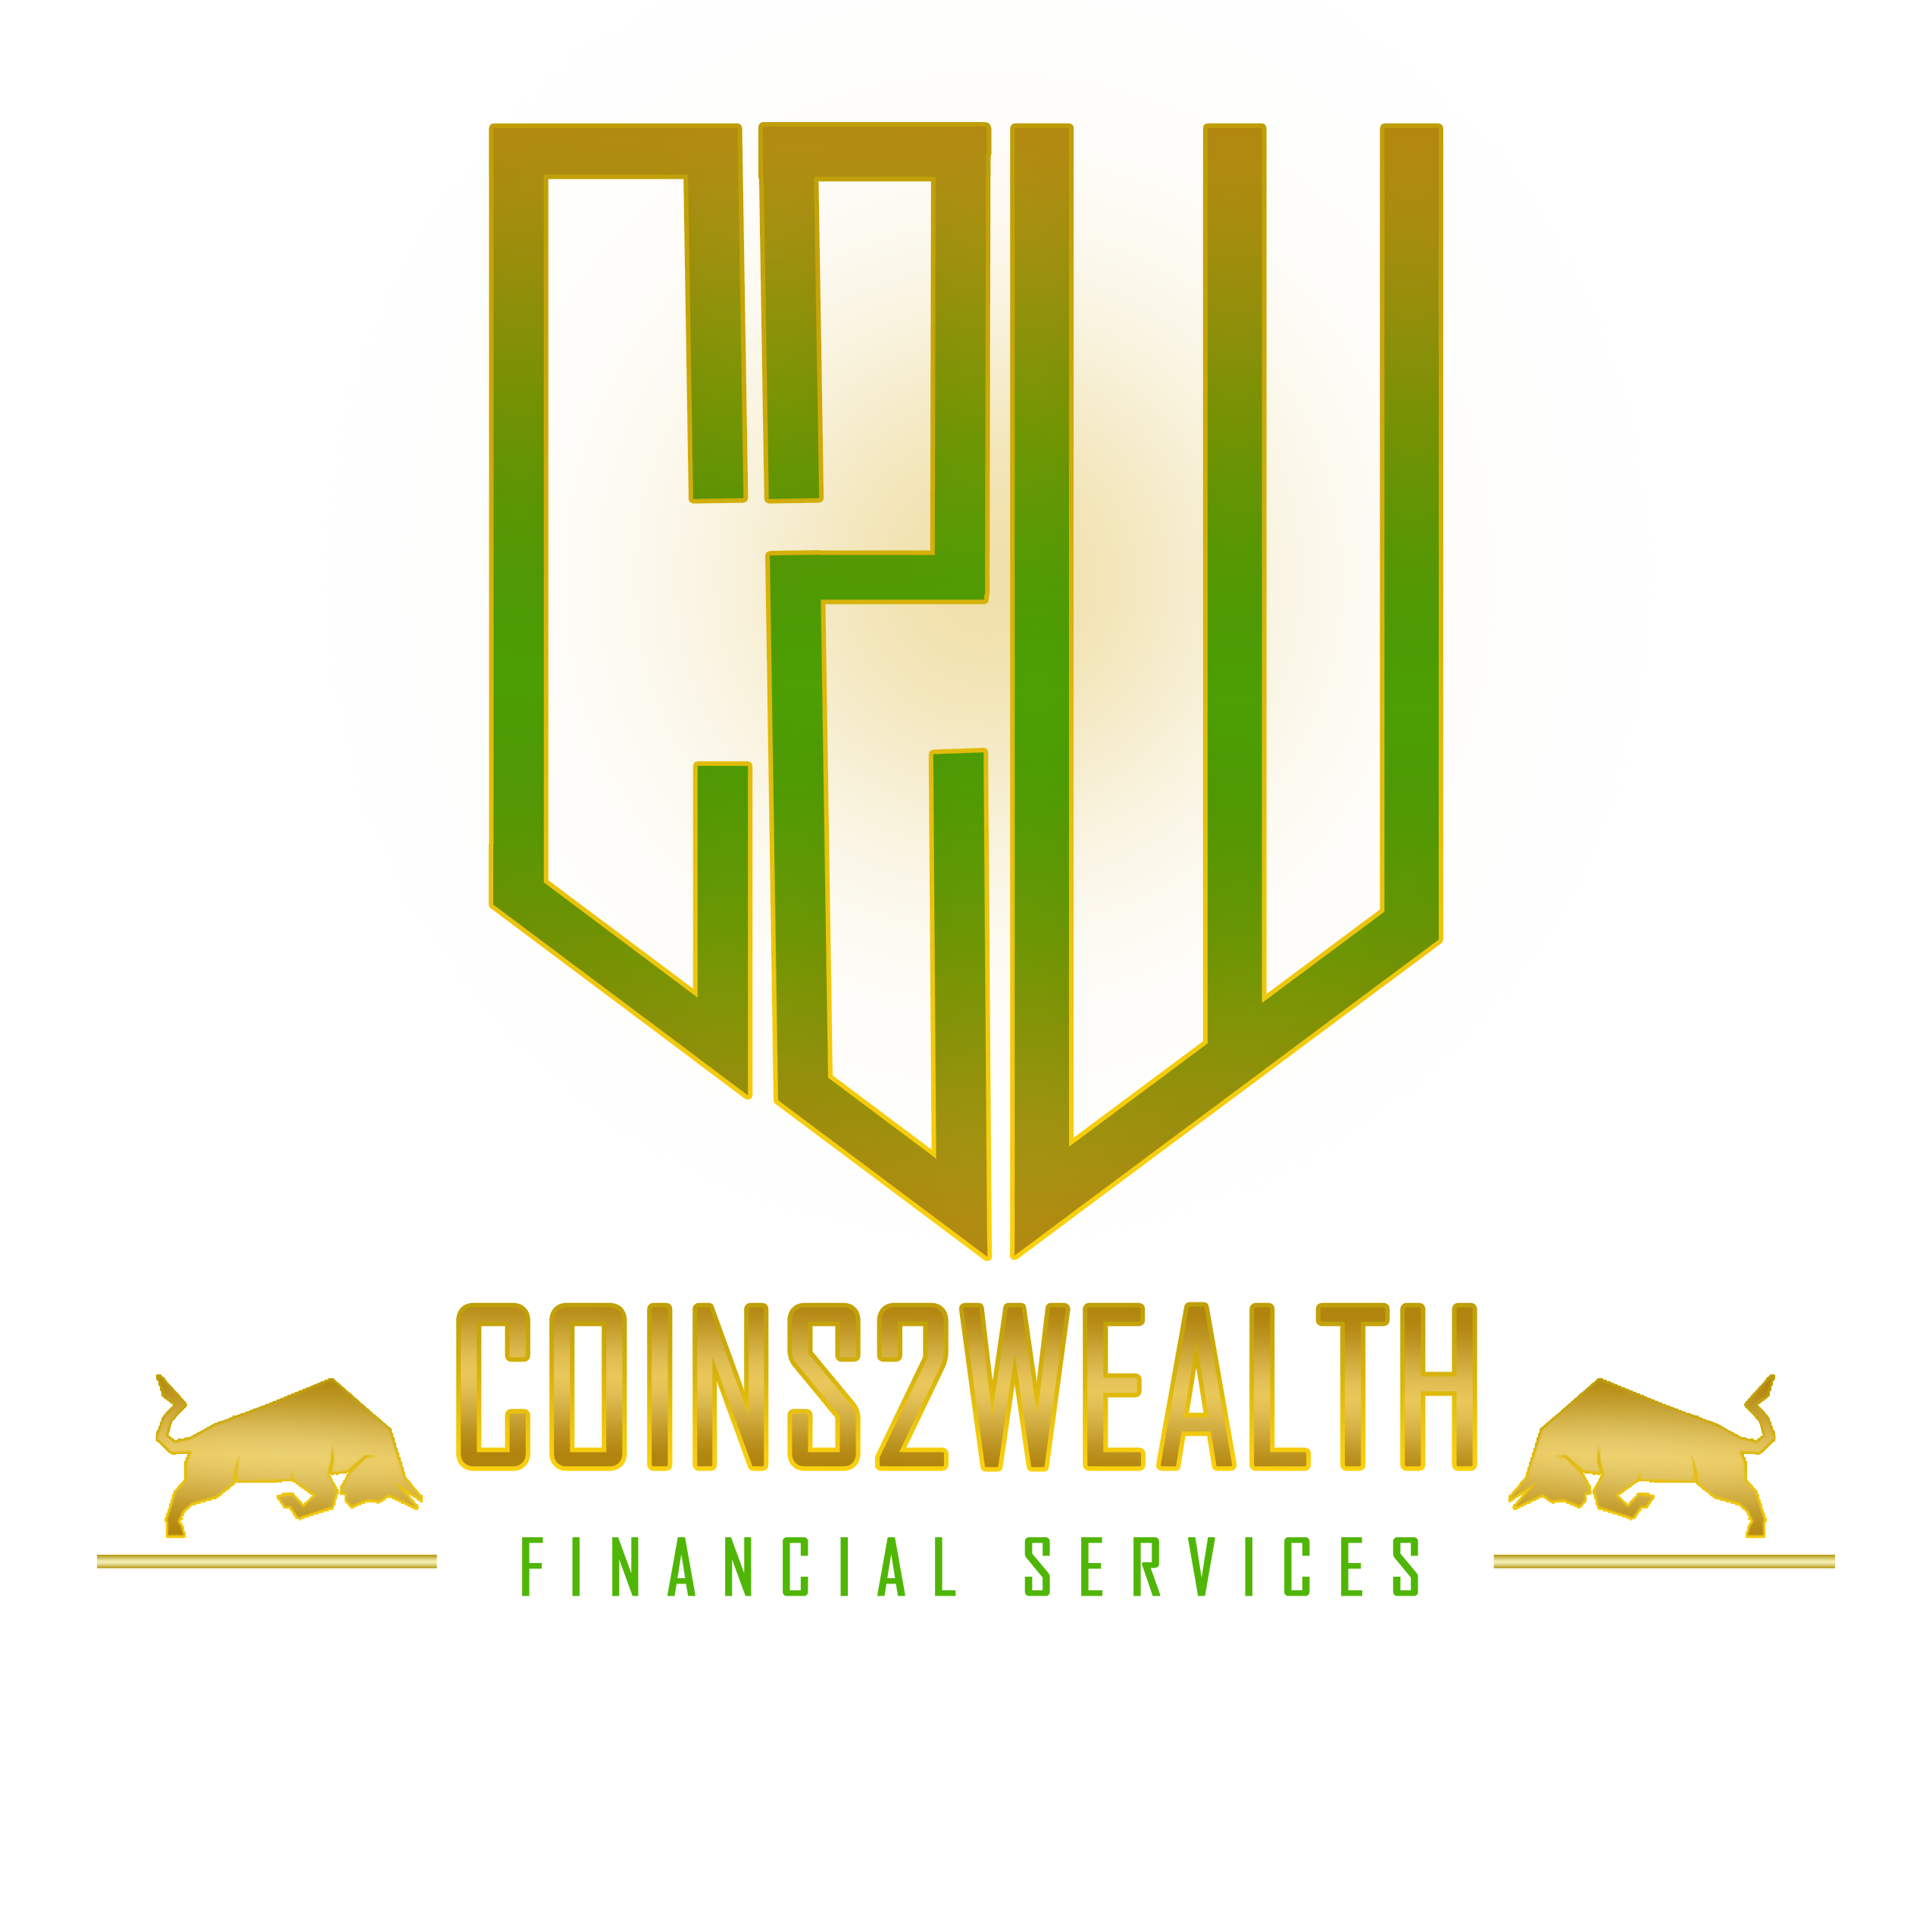 Coins2Wealth